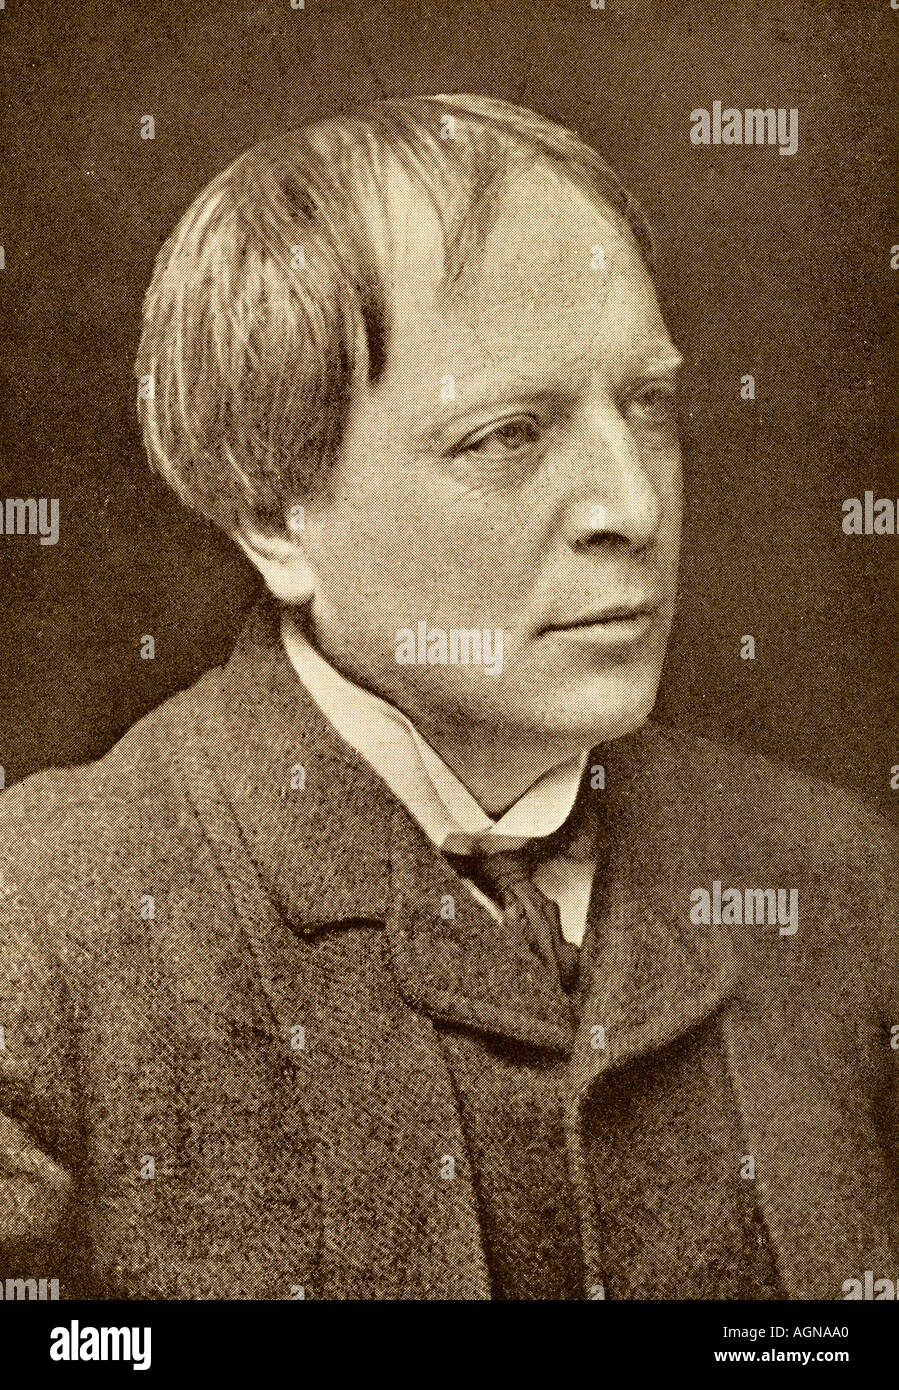 Arthur Machen, 1863 - 1947.  Welsh author and mystic, writer of supernatural, fantasy, and horror fiction. Stock Photo